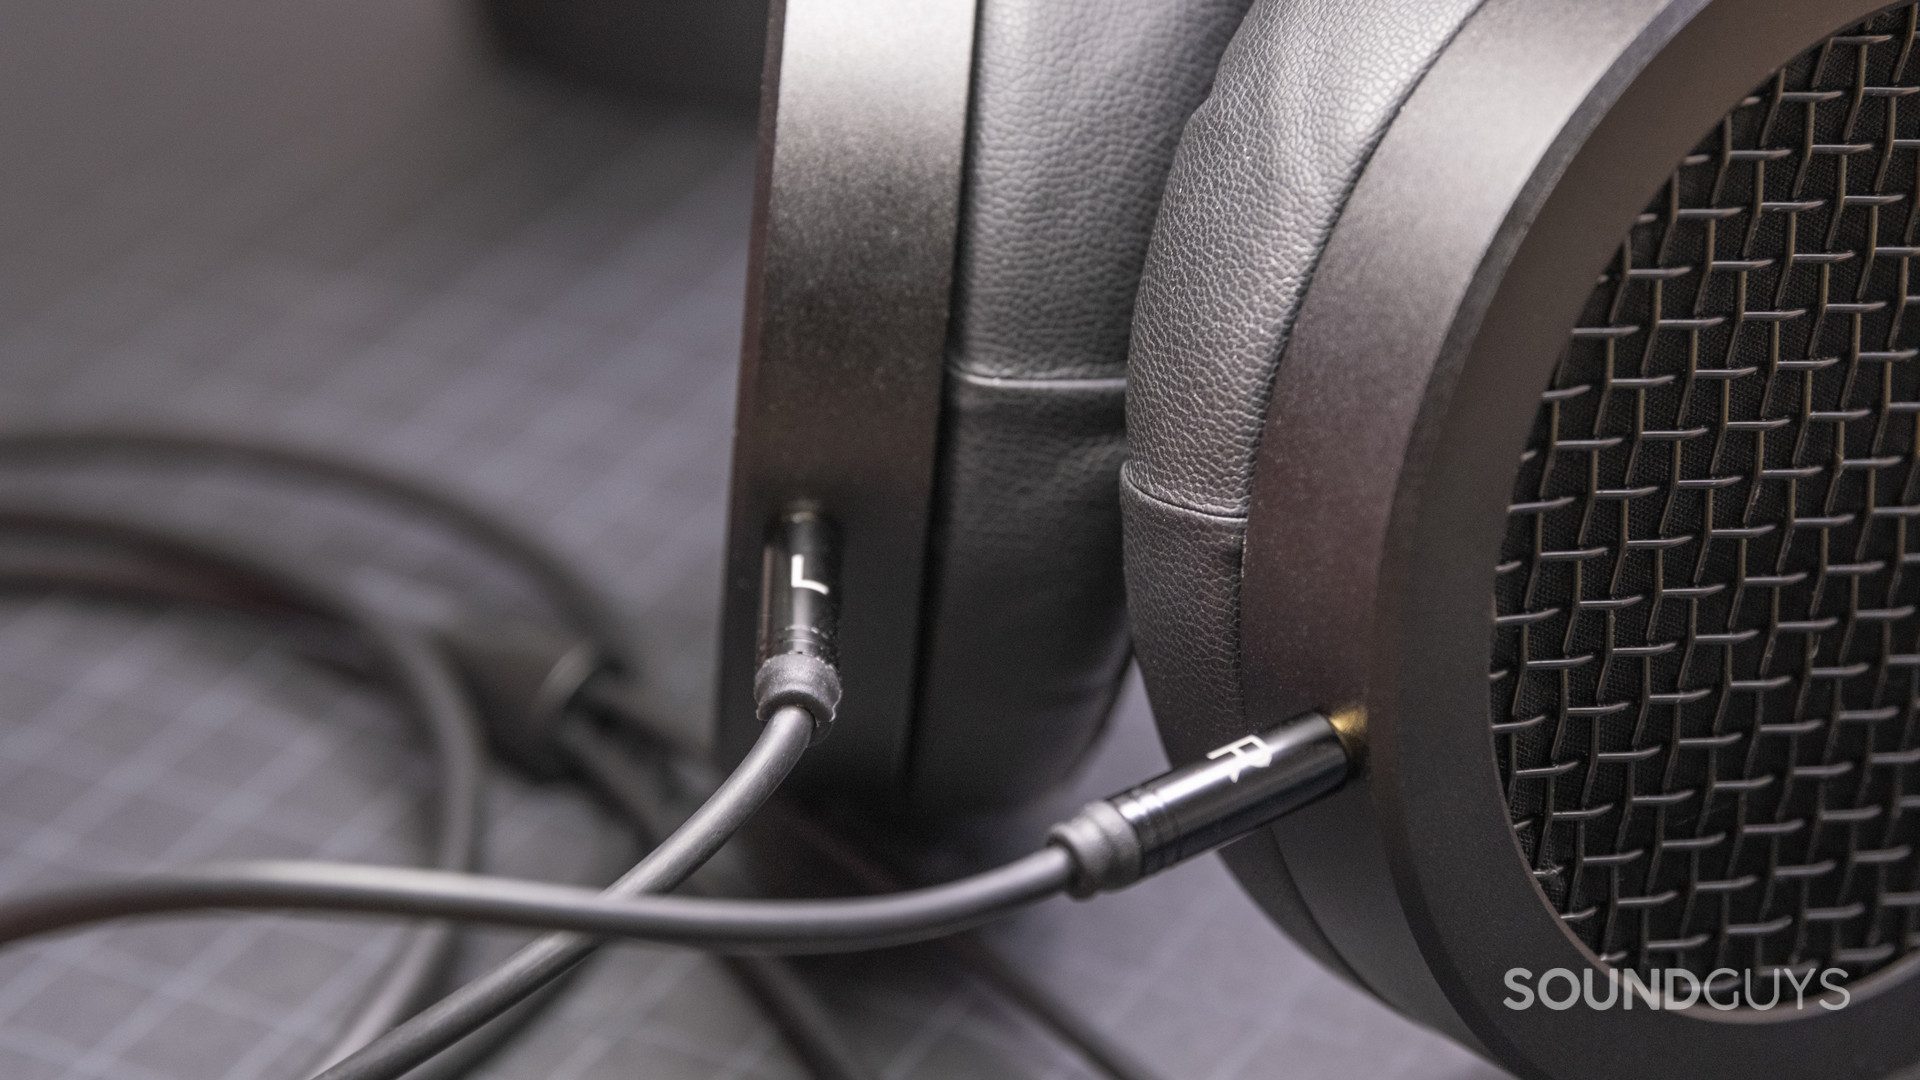 The Y-cable connects to the HiFiMan Sundara headphones.